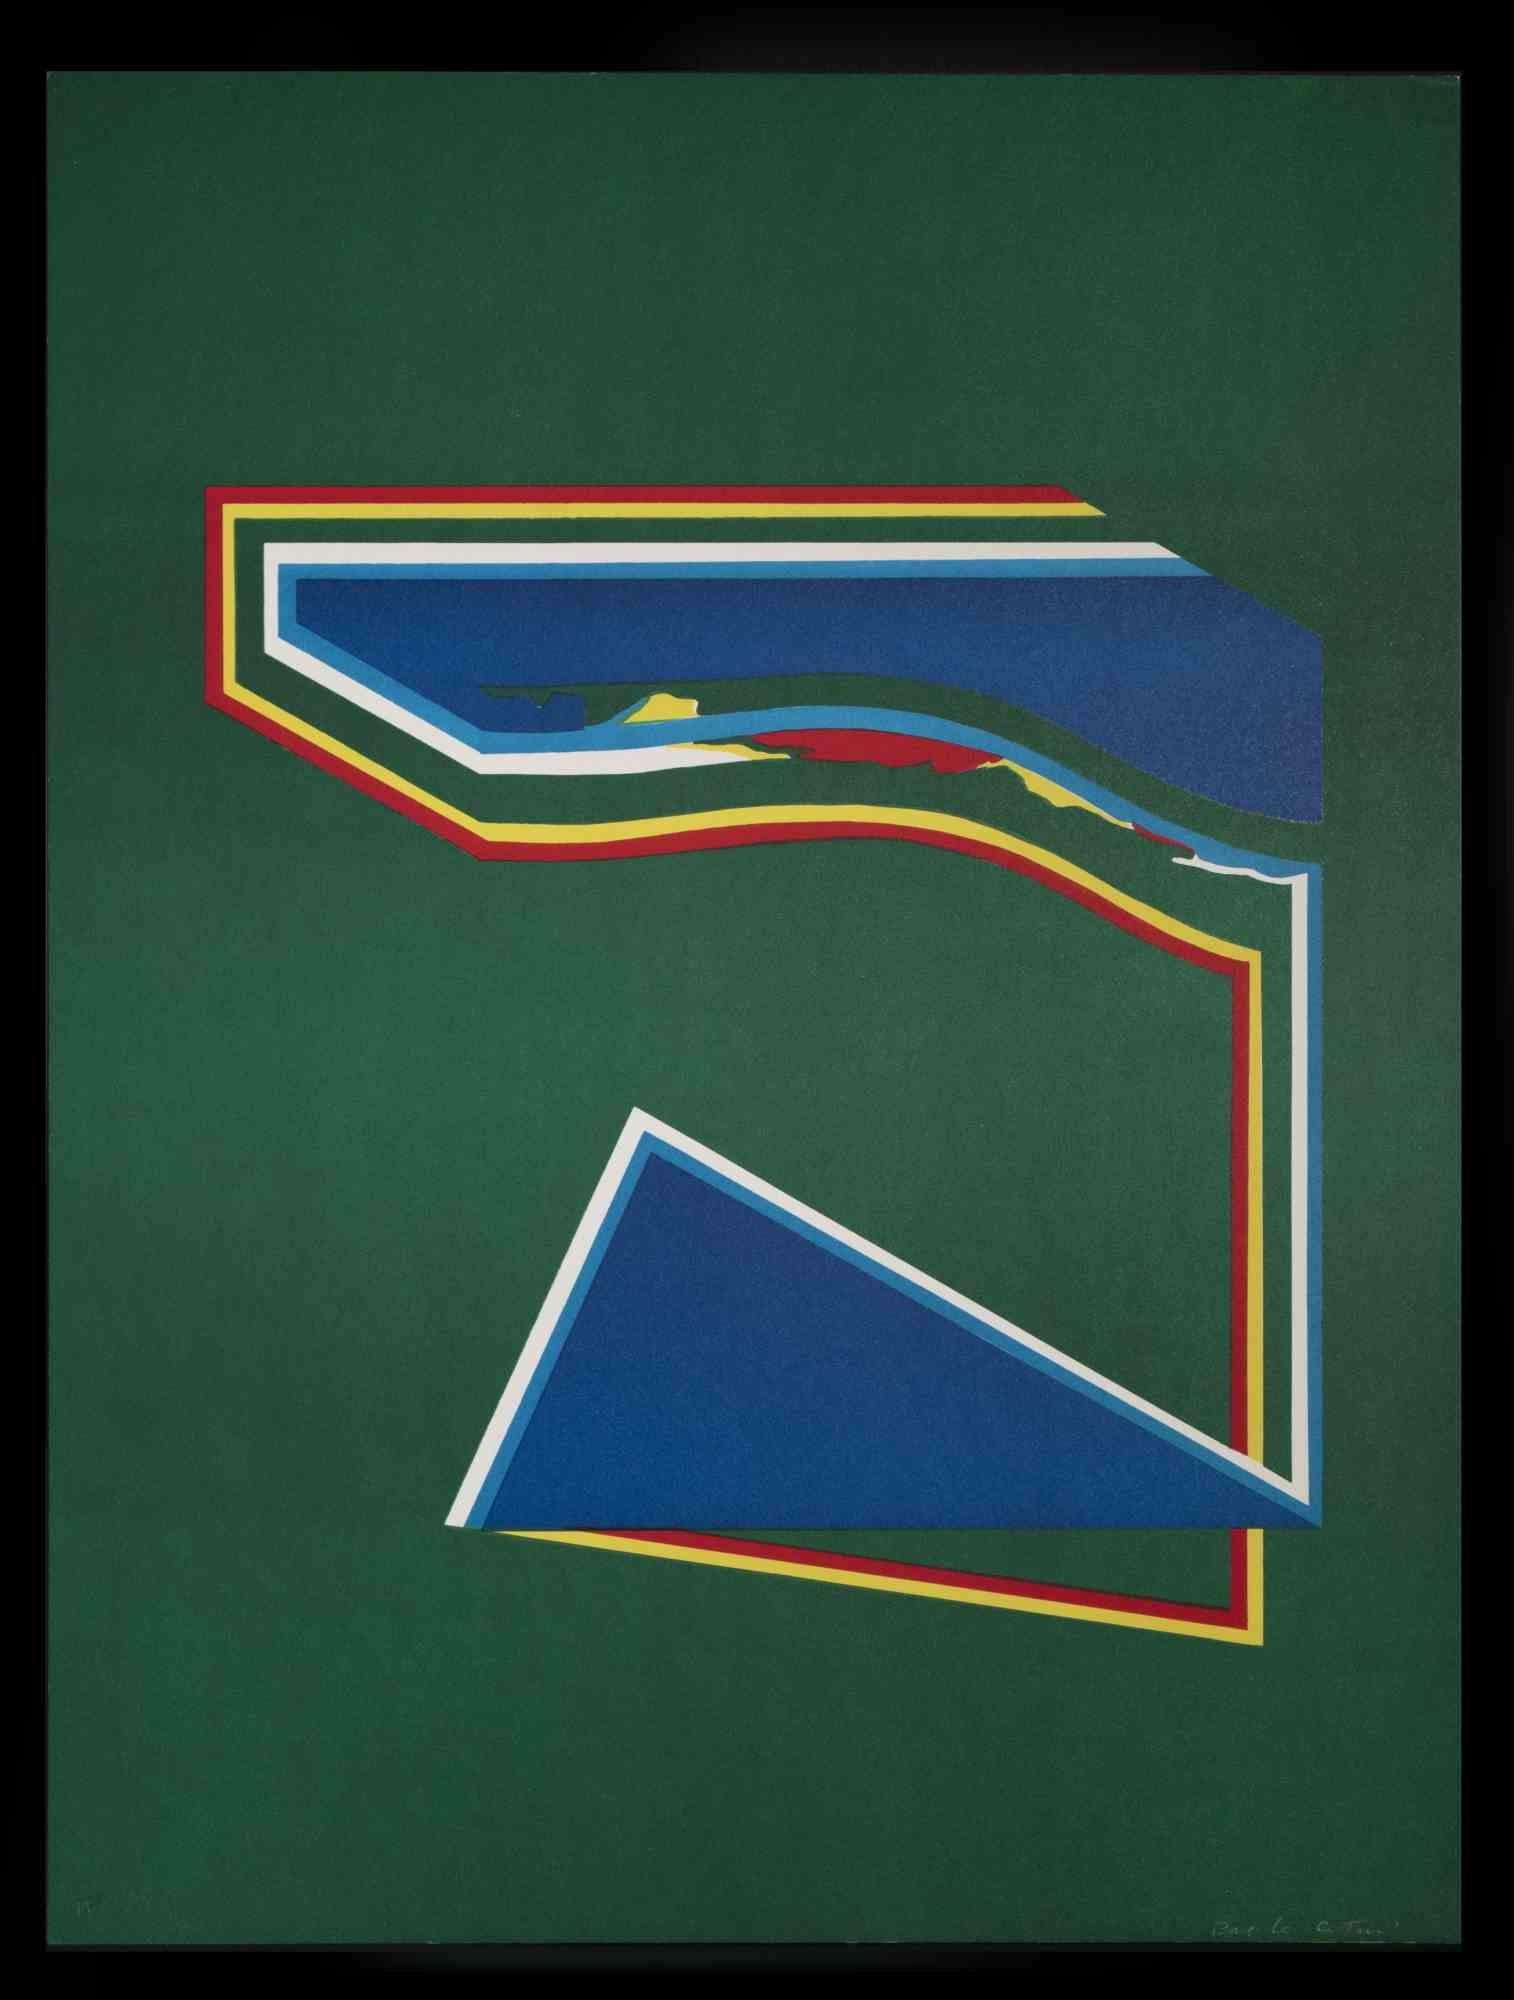 Geometric Figures is an original print realized by the artist Paolo Cotani in the 1970s.

This lithograph is hand-signed. Edition of 100 pieces.